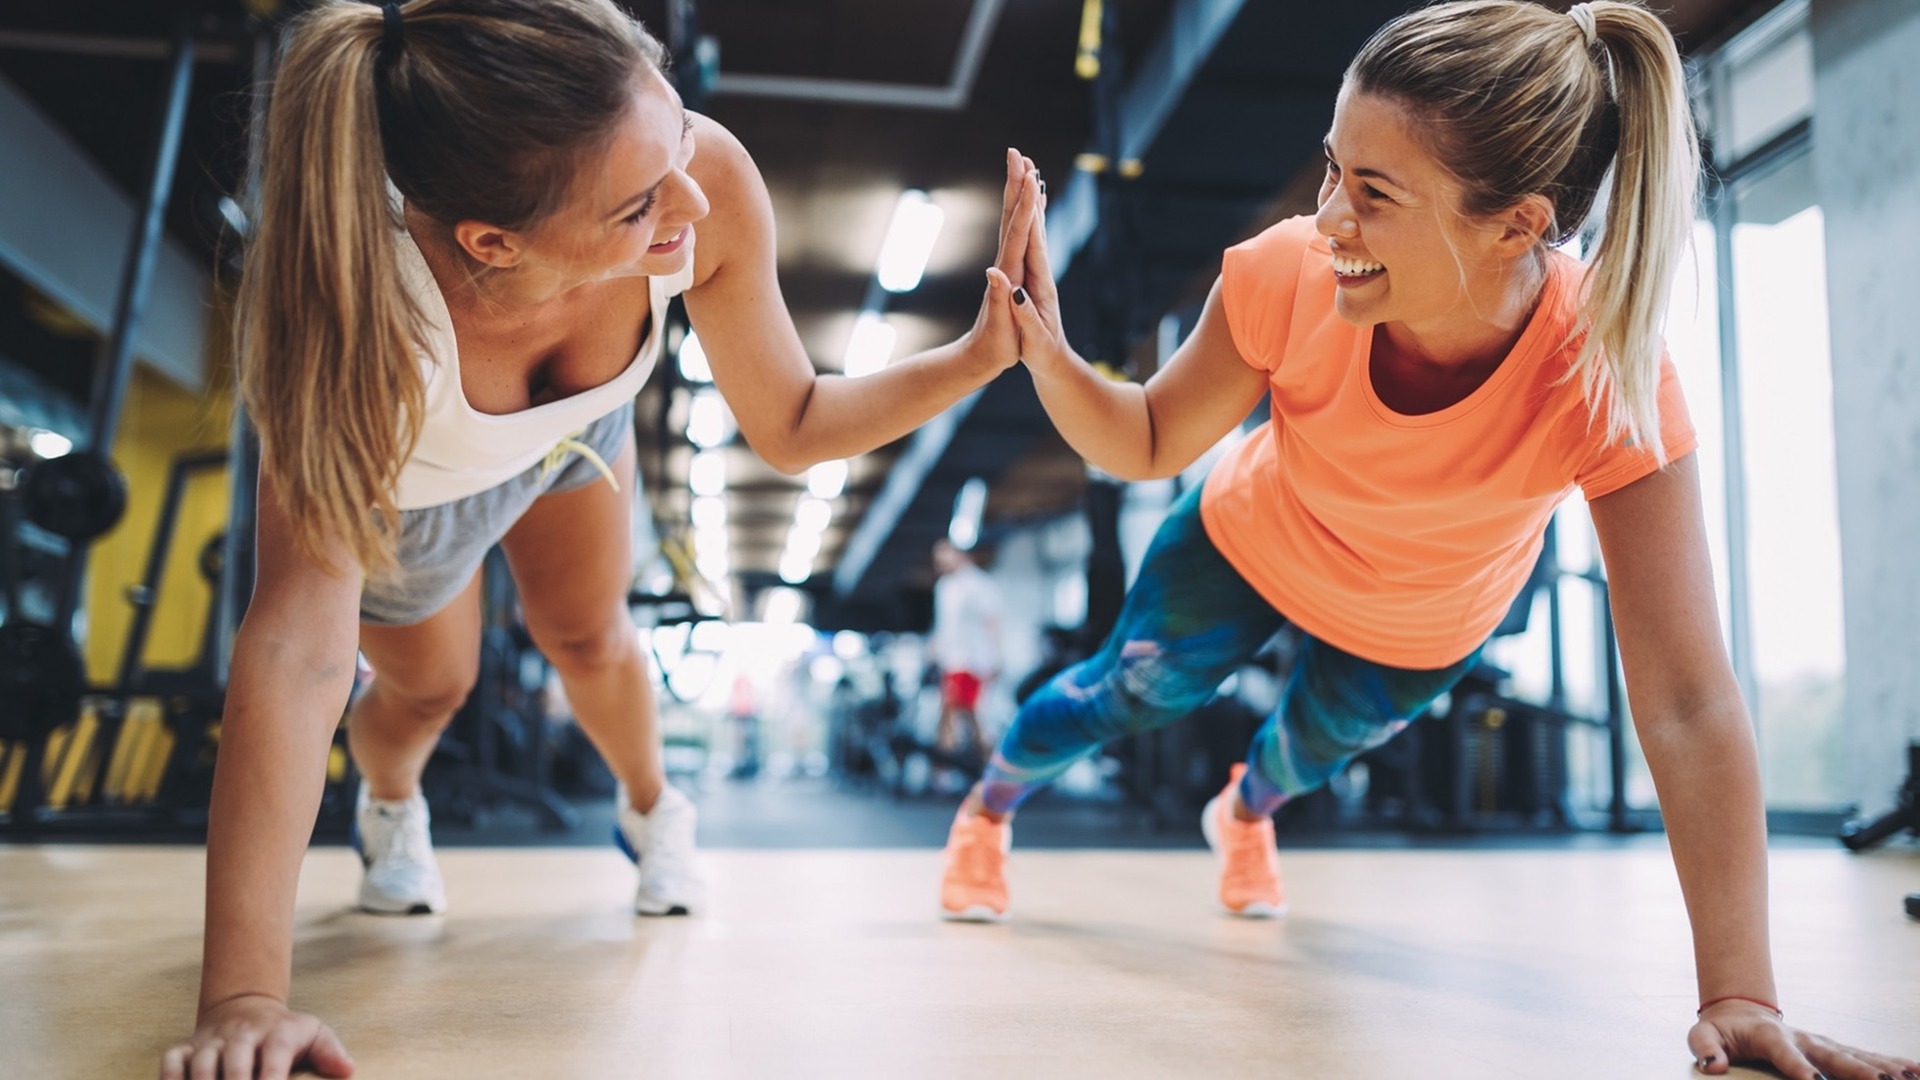 Two women in a fitness room